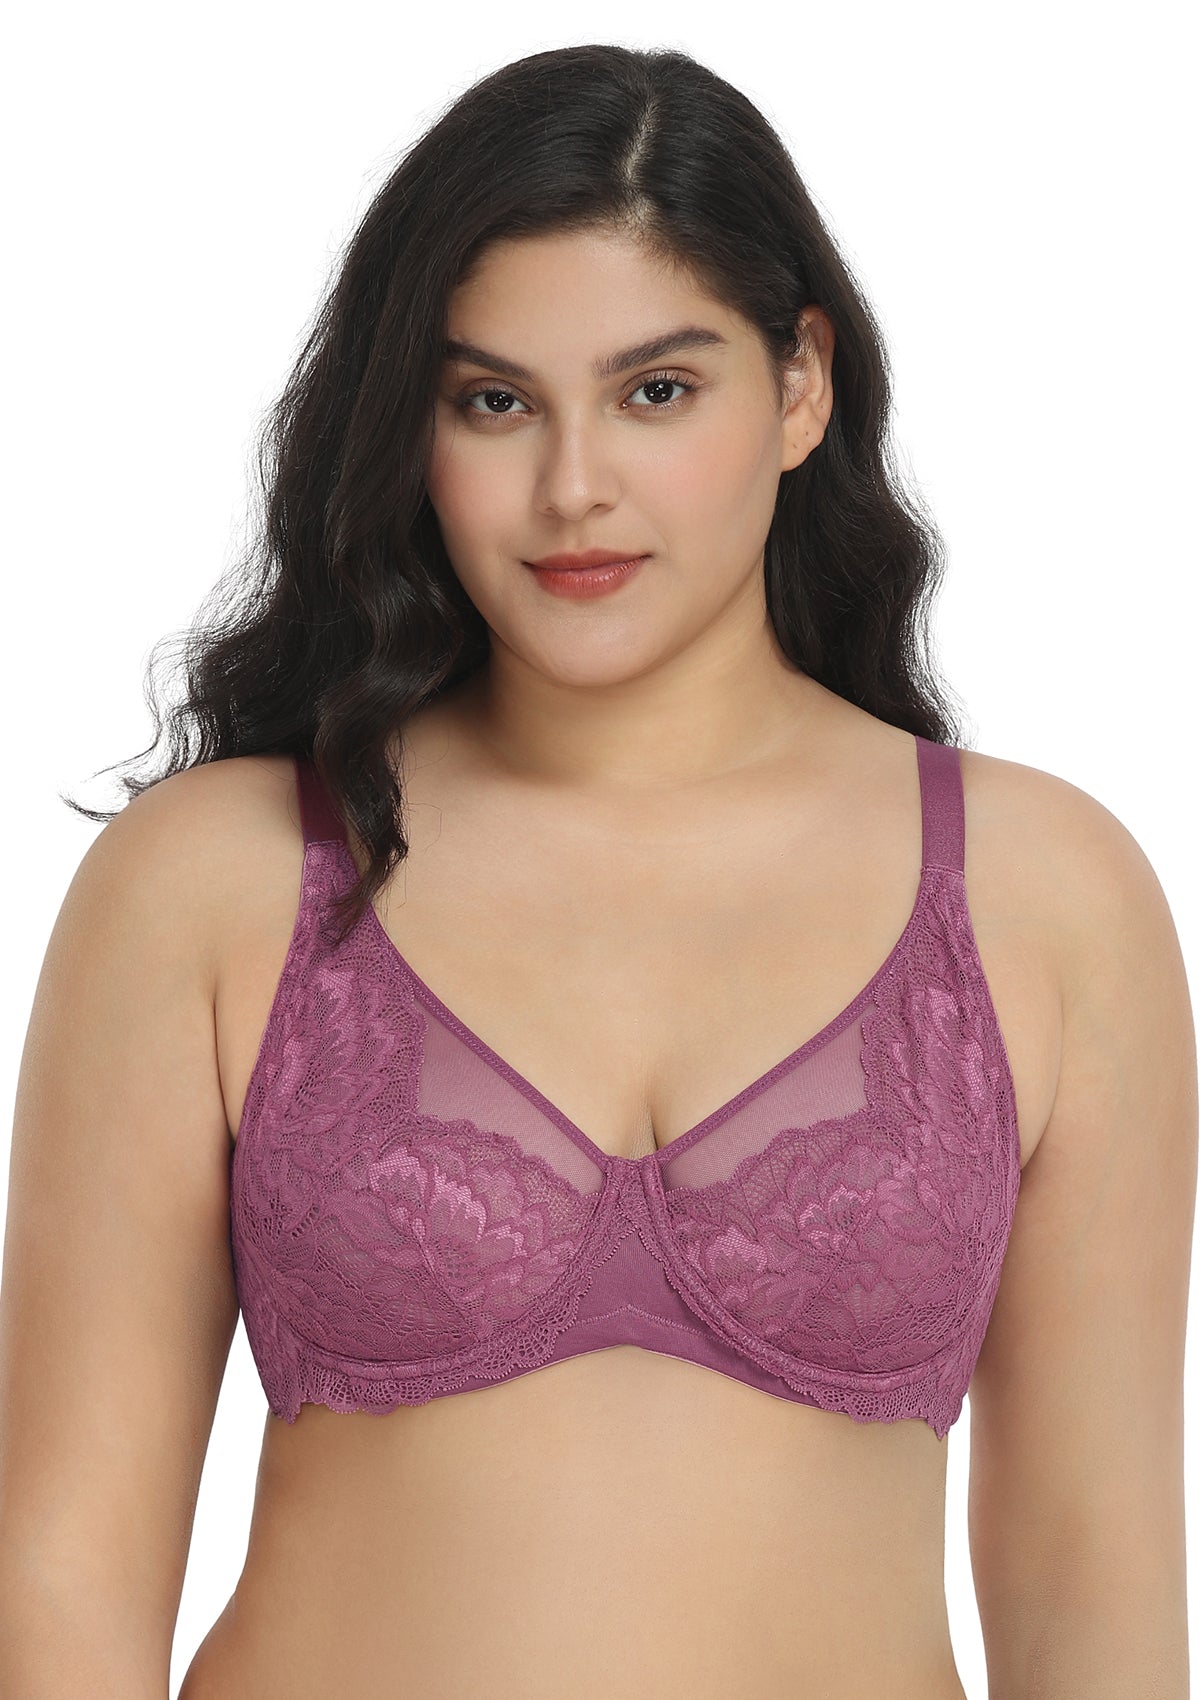 HSIA Paeonia Lace Full Coverage Underwire Non-Padded Uplifting Bra - Purple / 40 / C